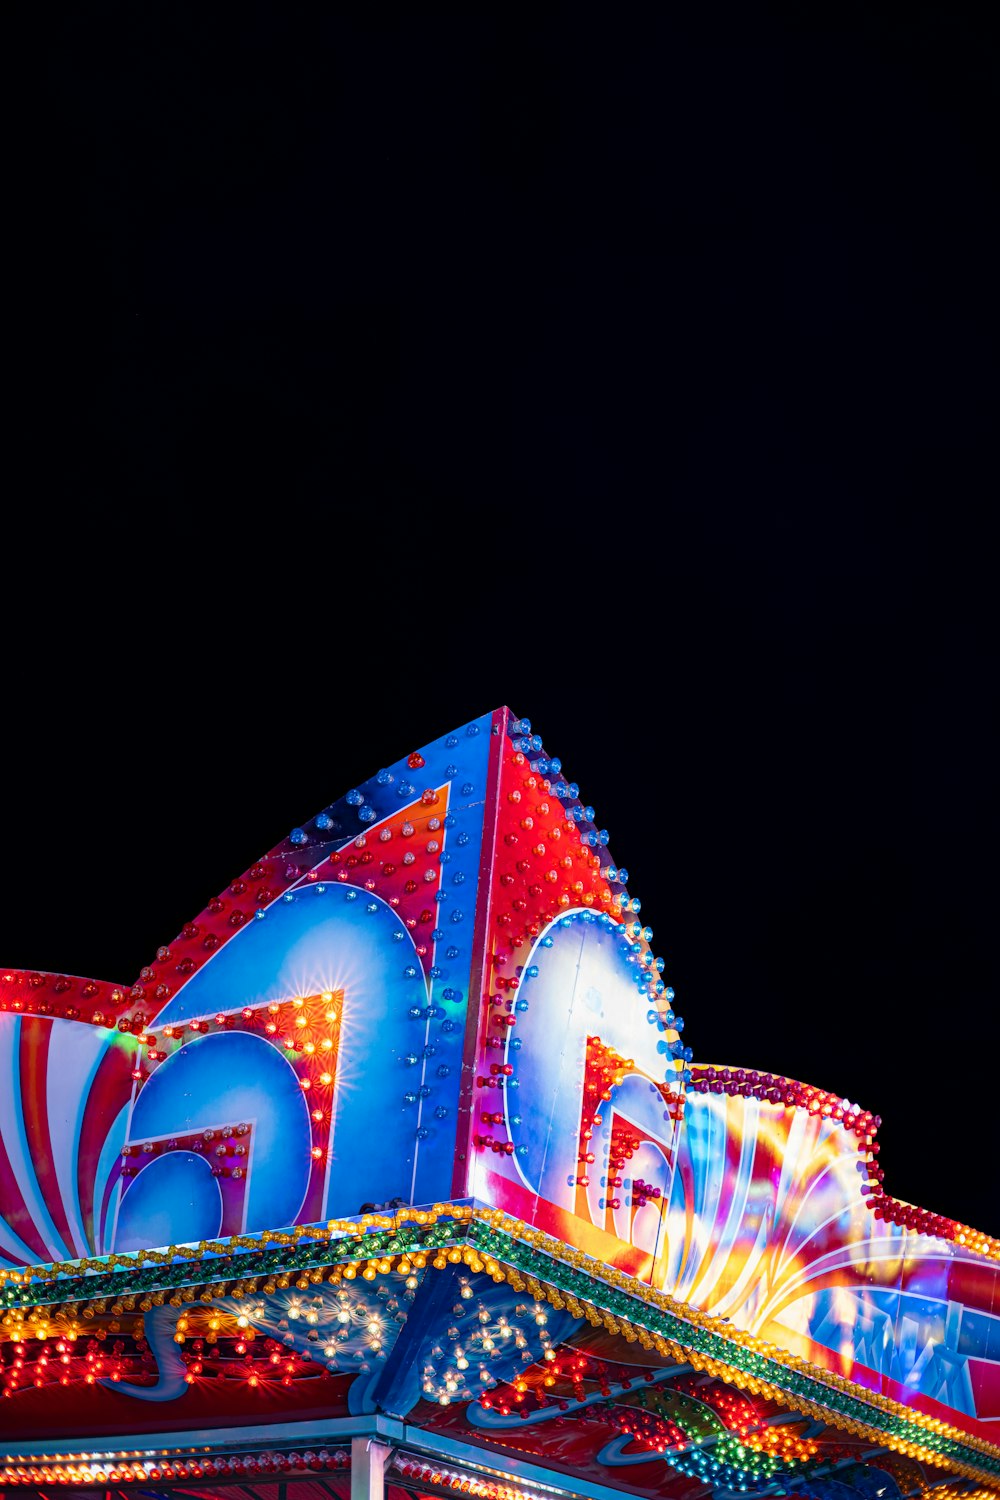 a merry go round ride lit up at night